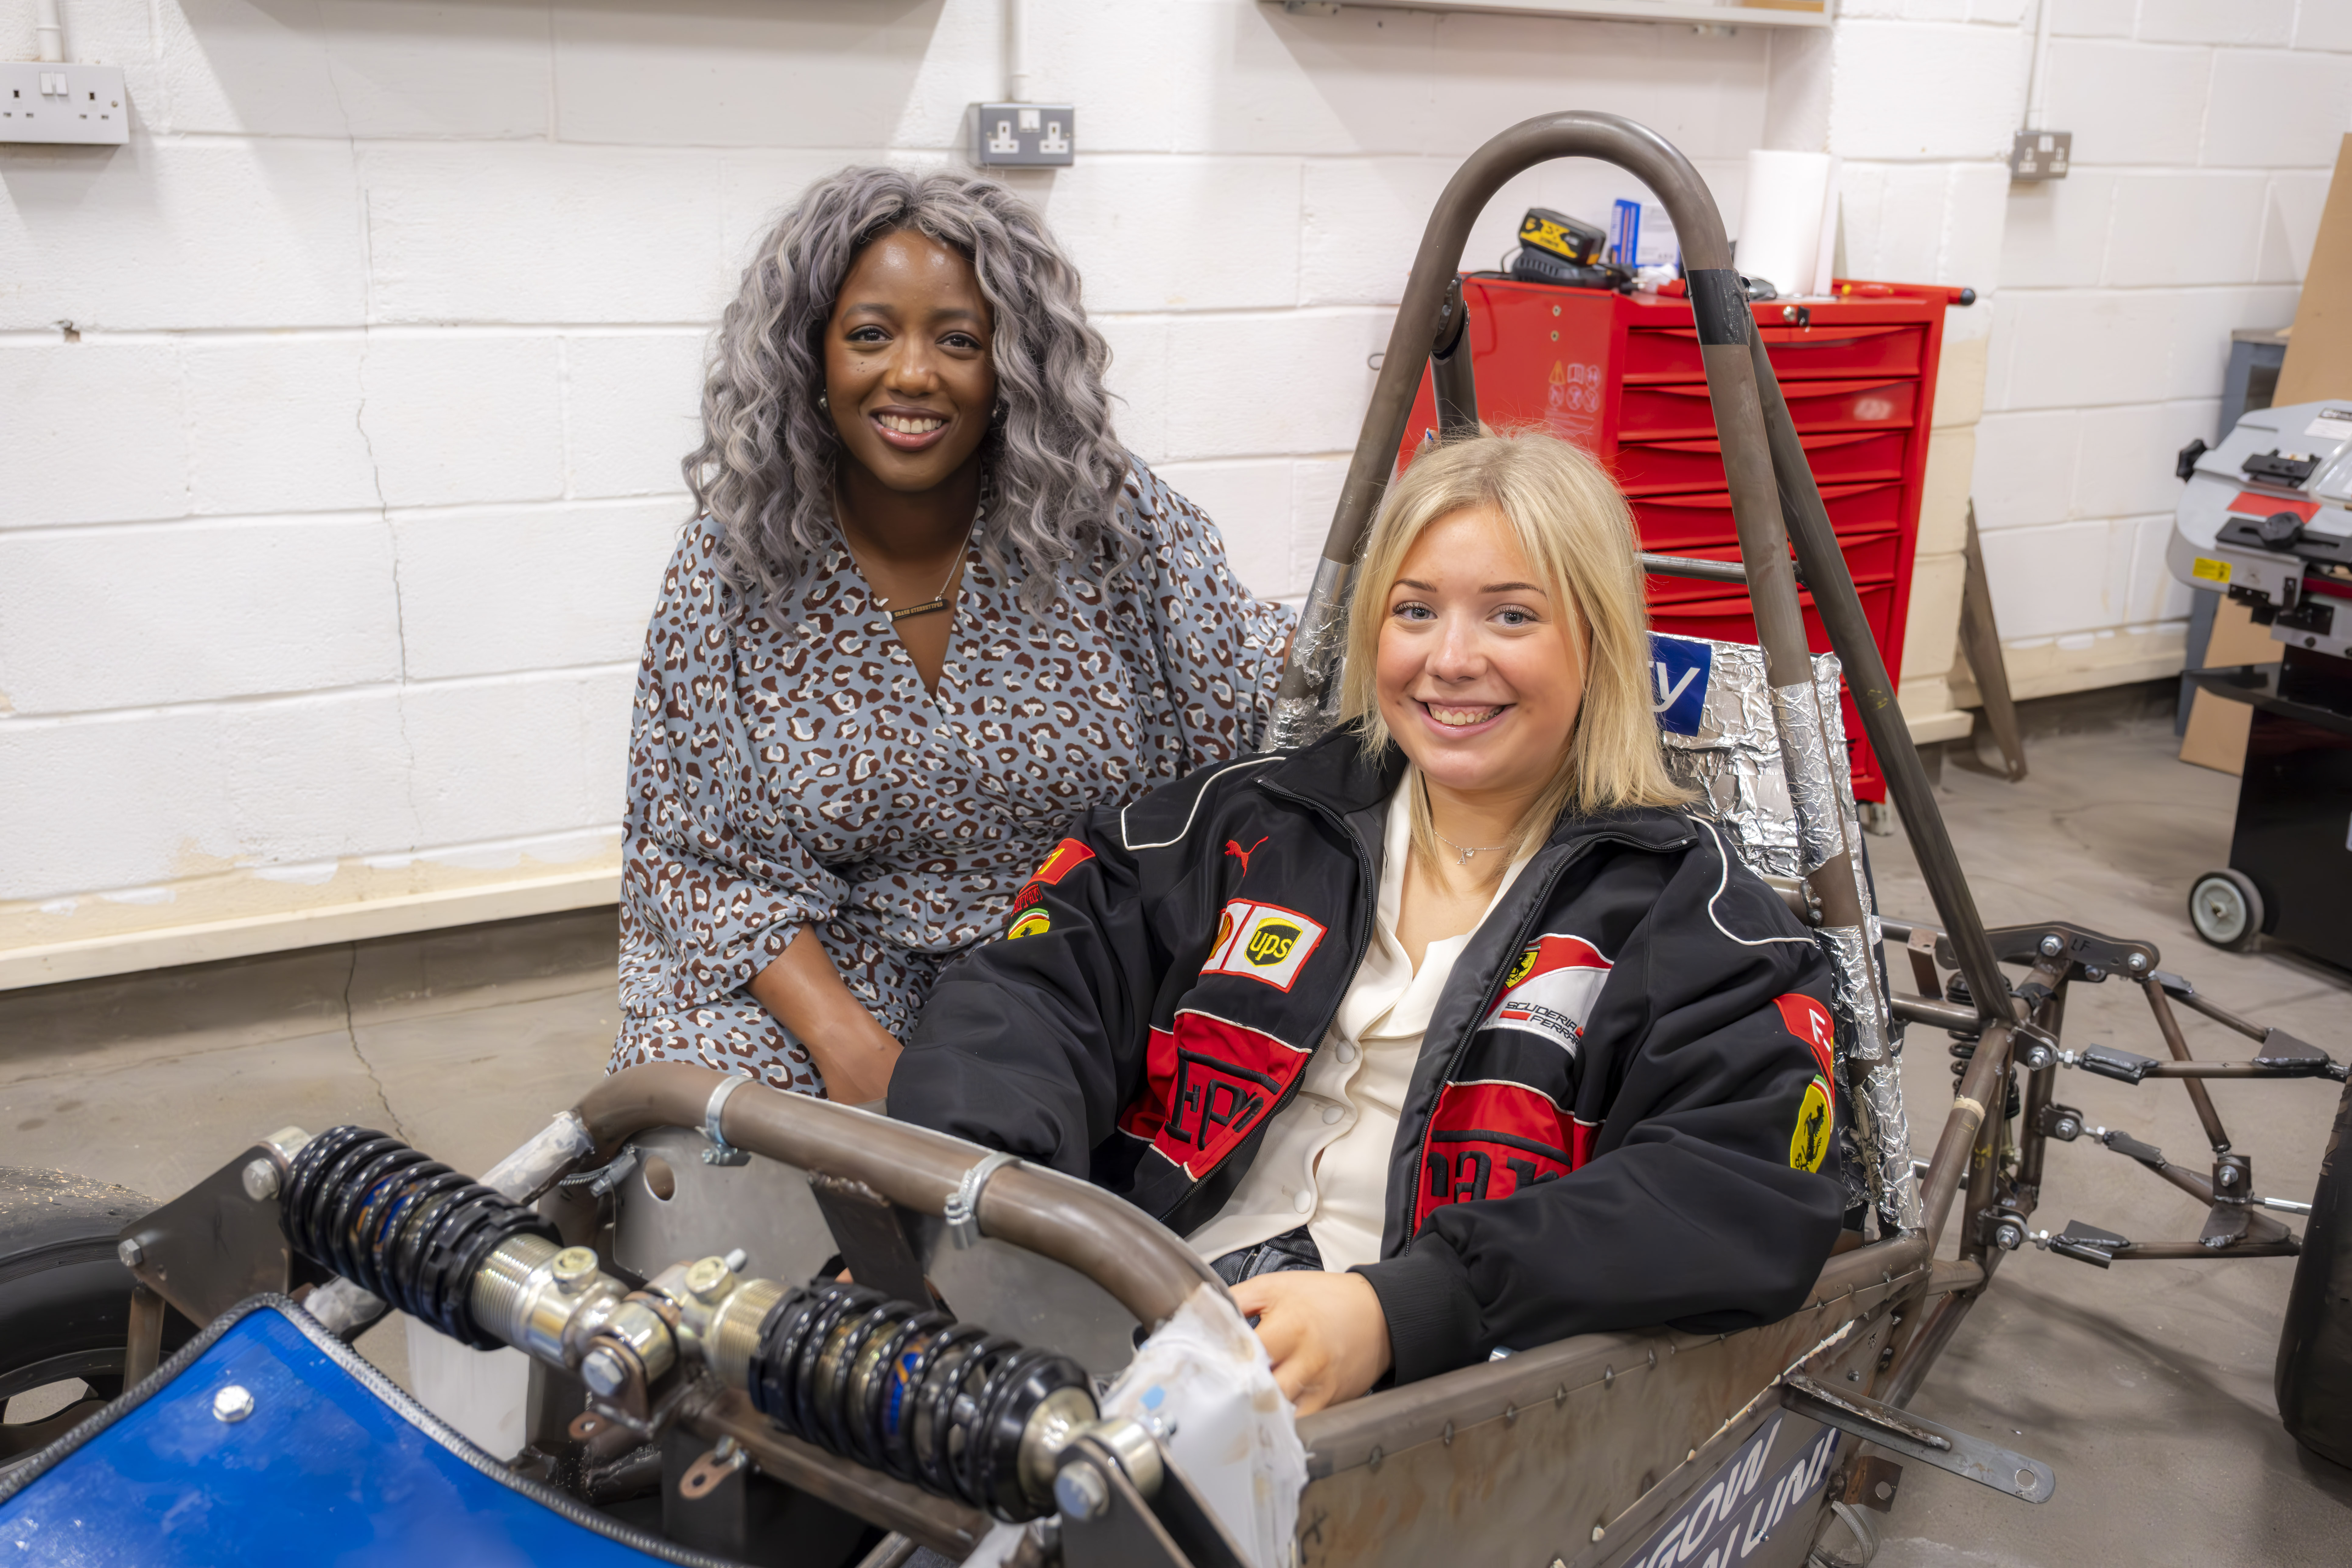 Anne-Marie Imafidon pictured with student Cara Nicole Edgar in a workshop at GCU